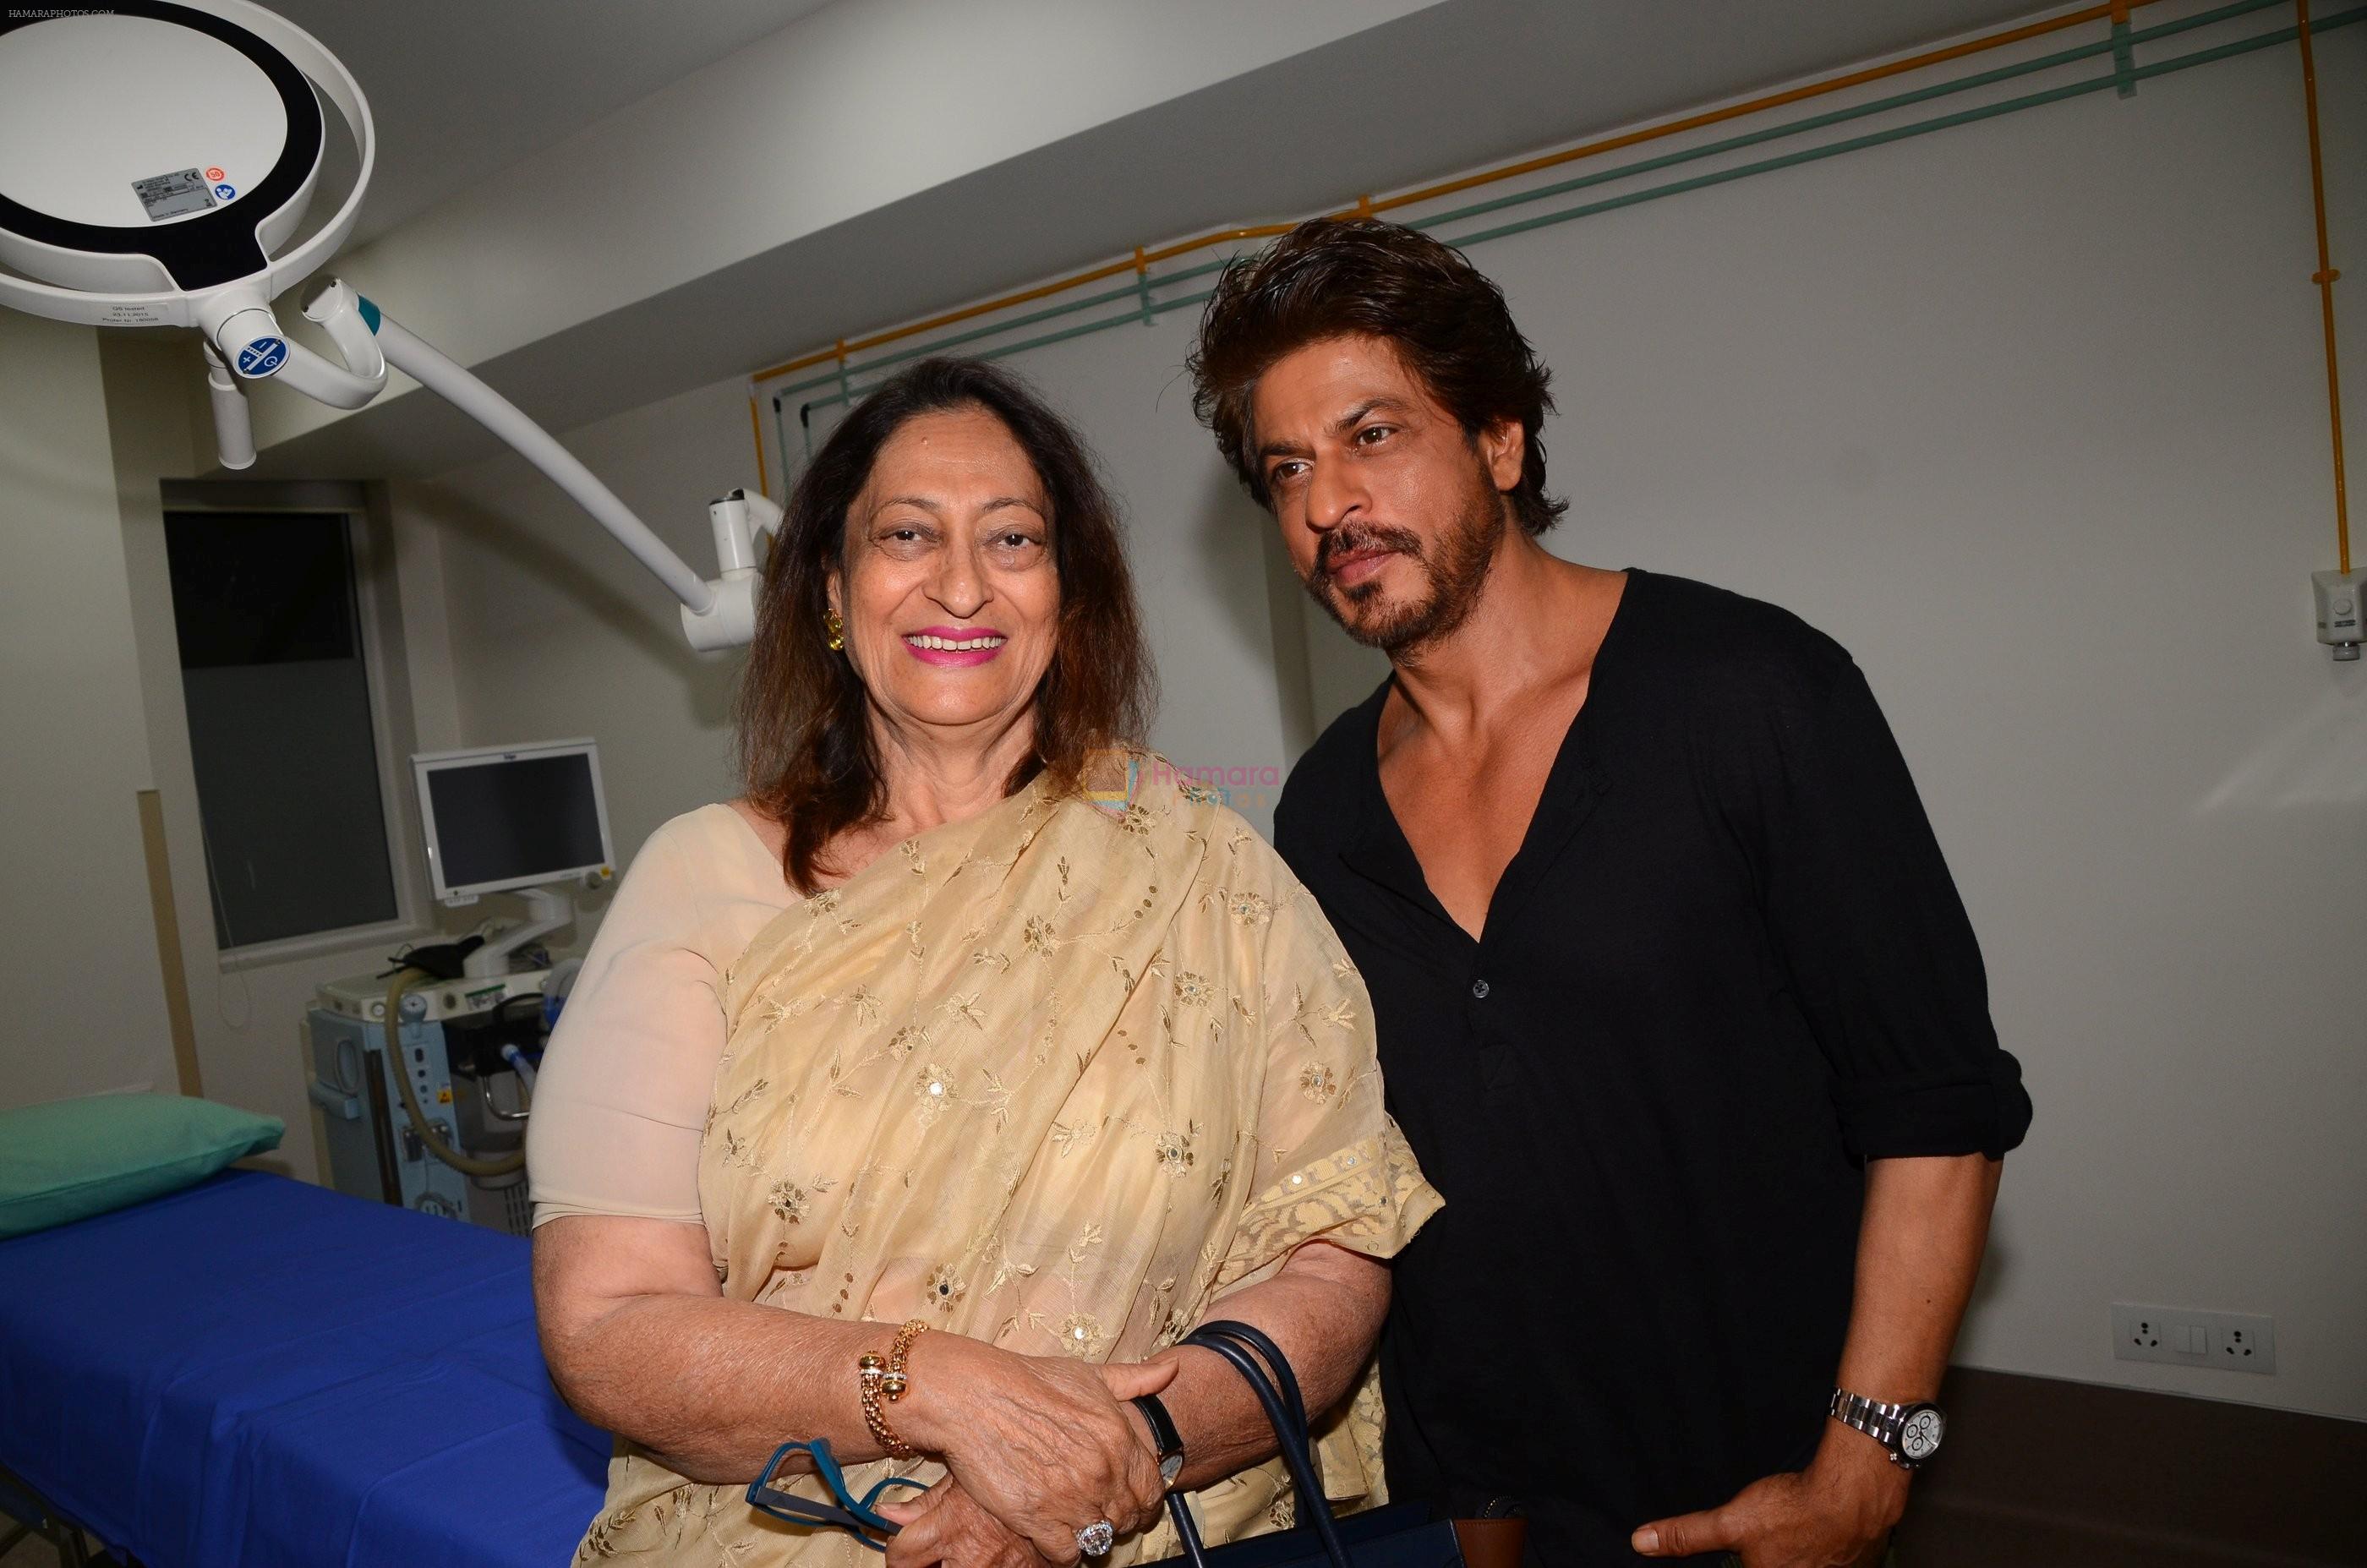 Shah Rukh Khan Launches Bone Marrow Transplant Centre & Birthing Centre at Nanavati Super Speciality Hospital with Chairman and M.D. Abhay Soi and family